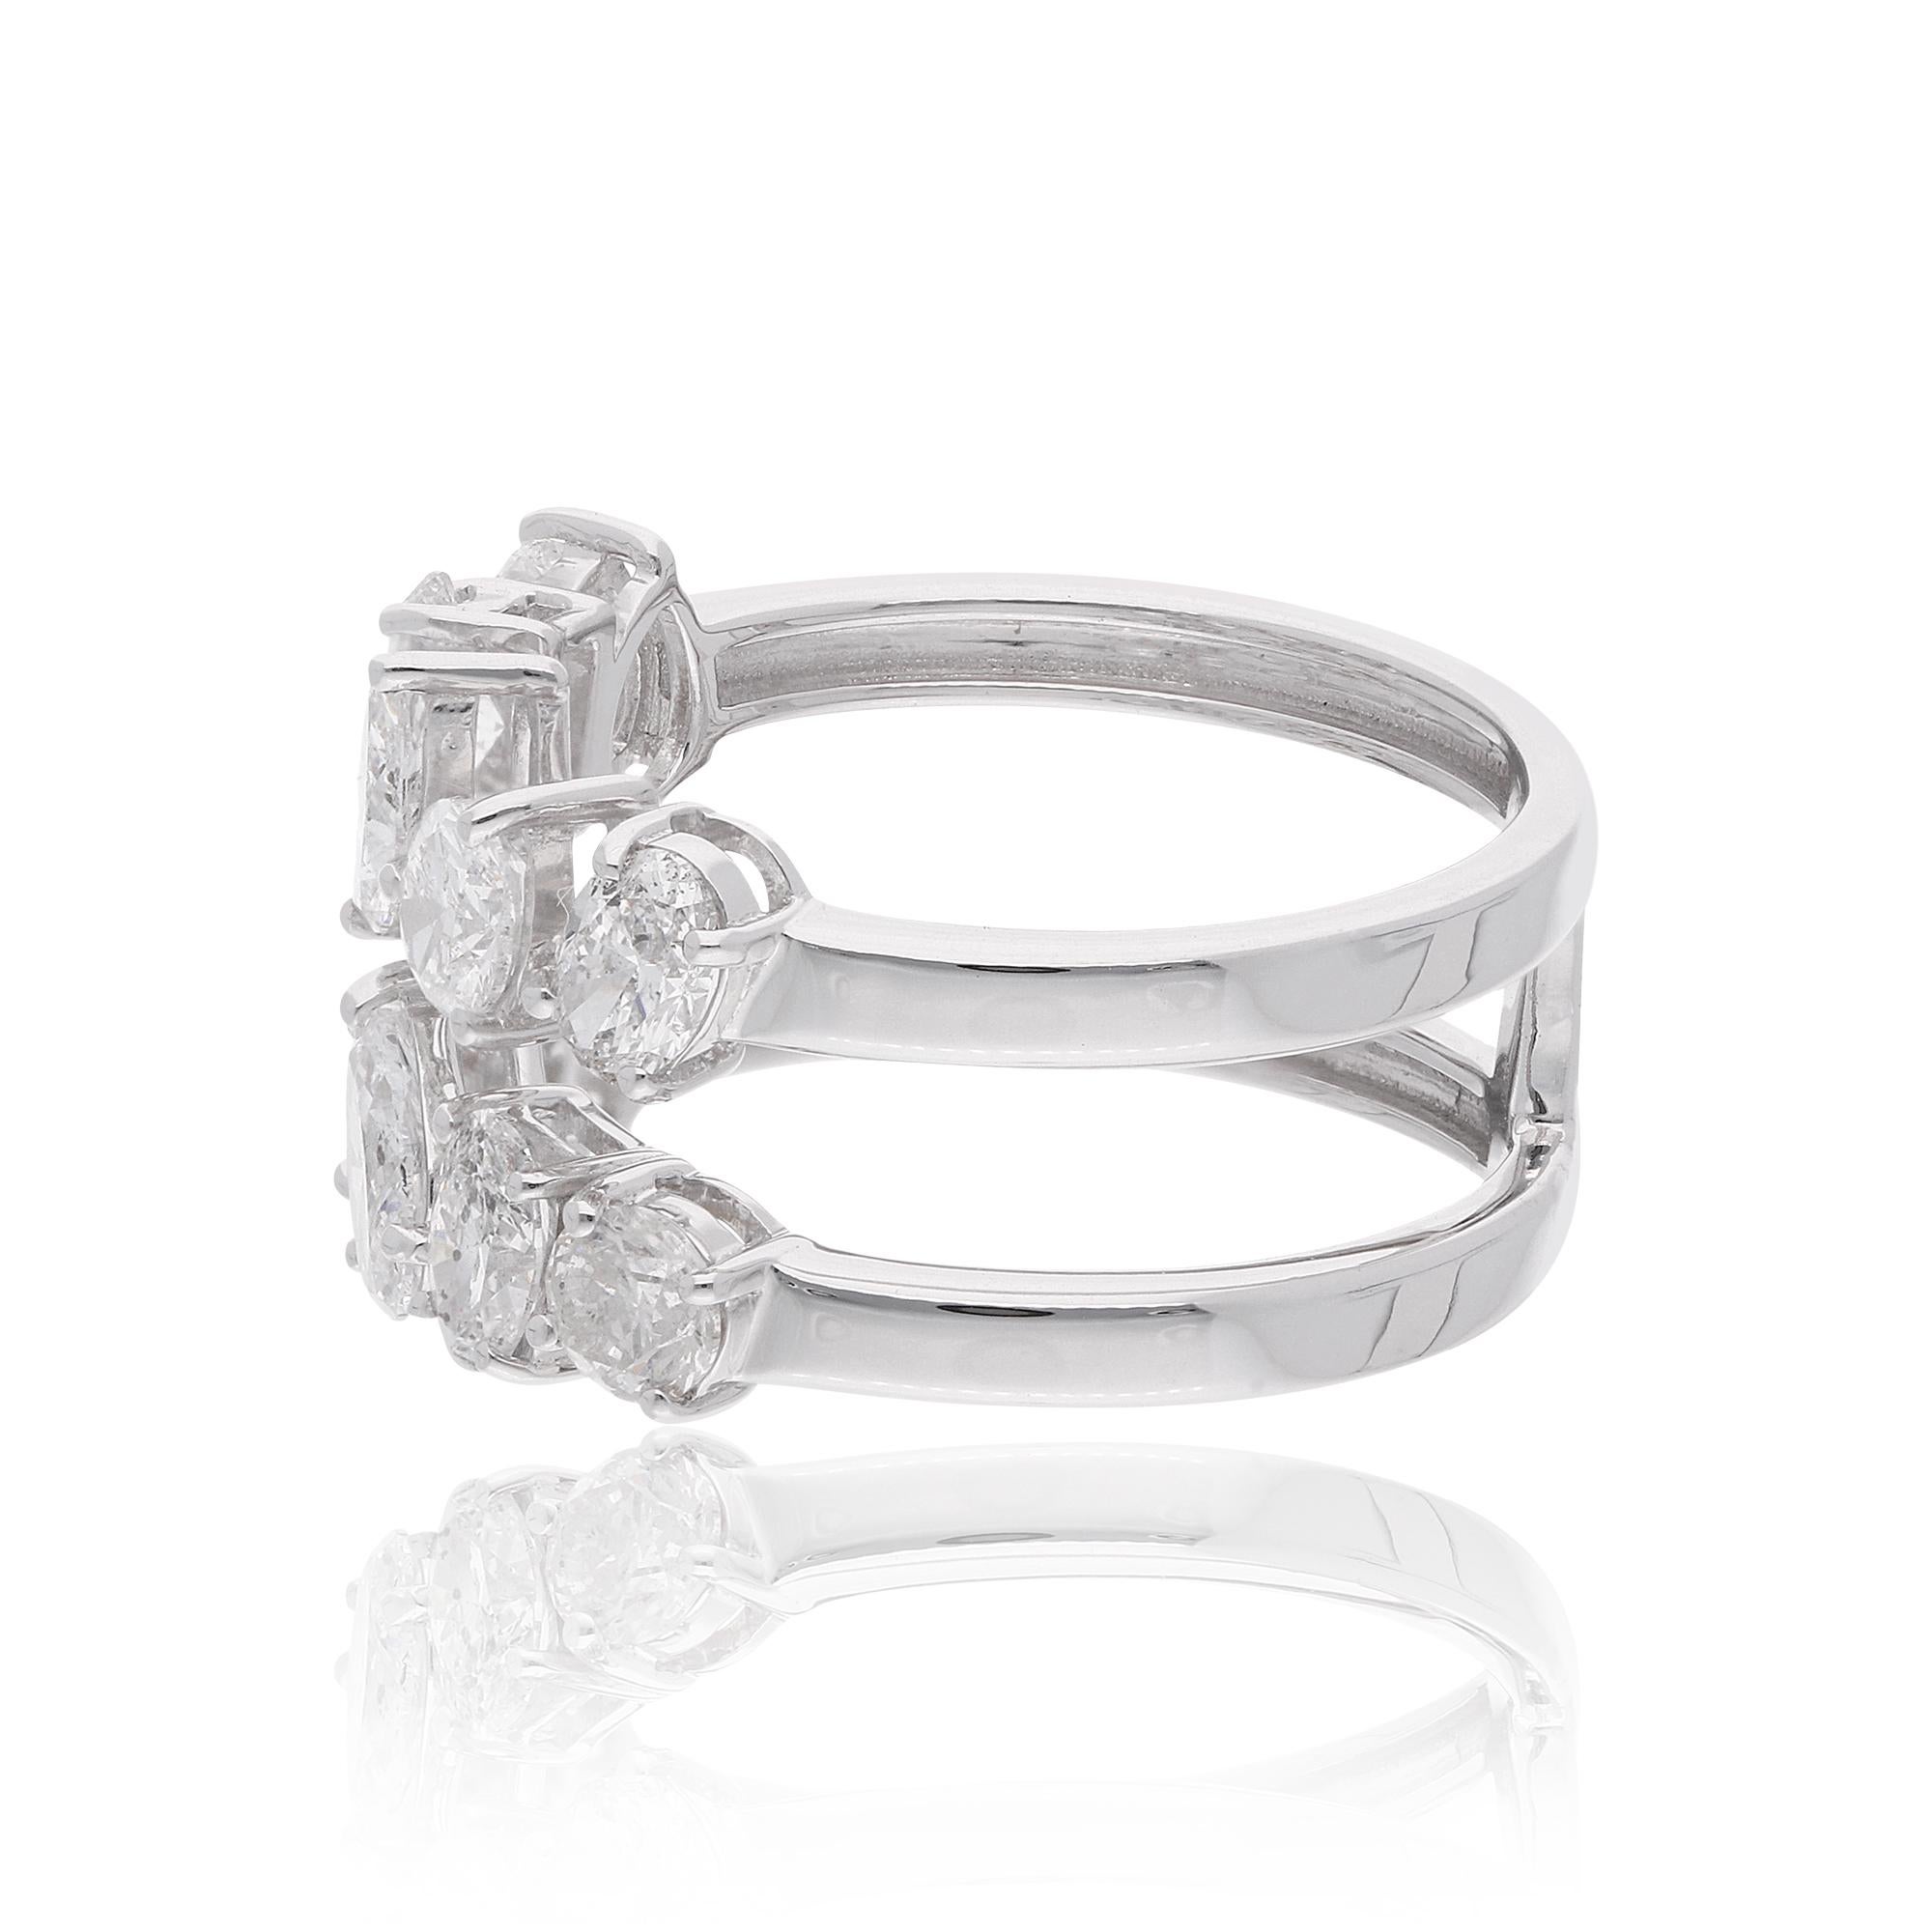 This Double Row Ring is sure to catch the eye and draw compliments wherever you go. The double band design adds a modern twist to the classic diamond ring, creating a look that is both timeless and contemporary. This ring is available in